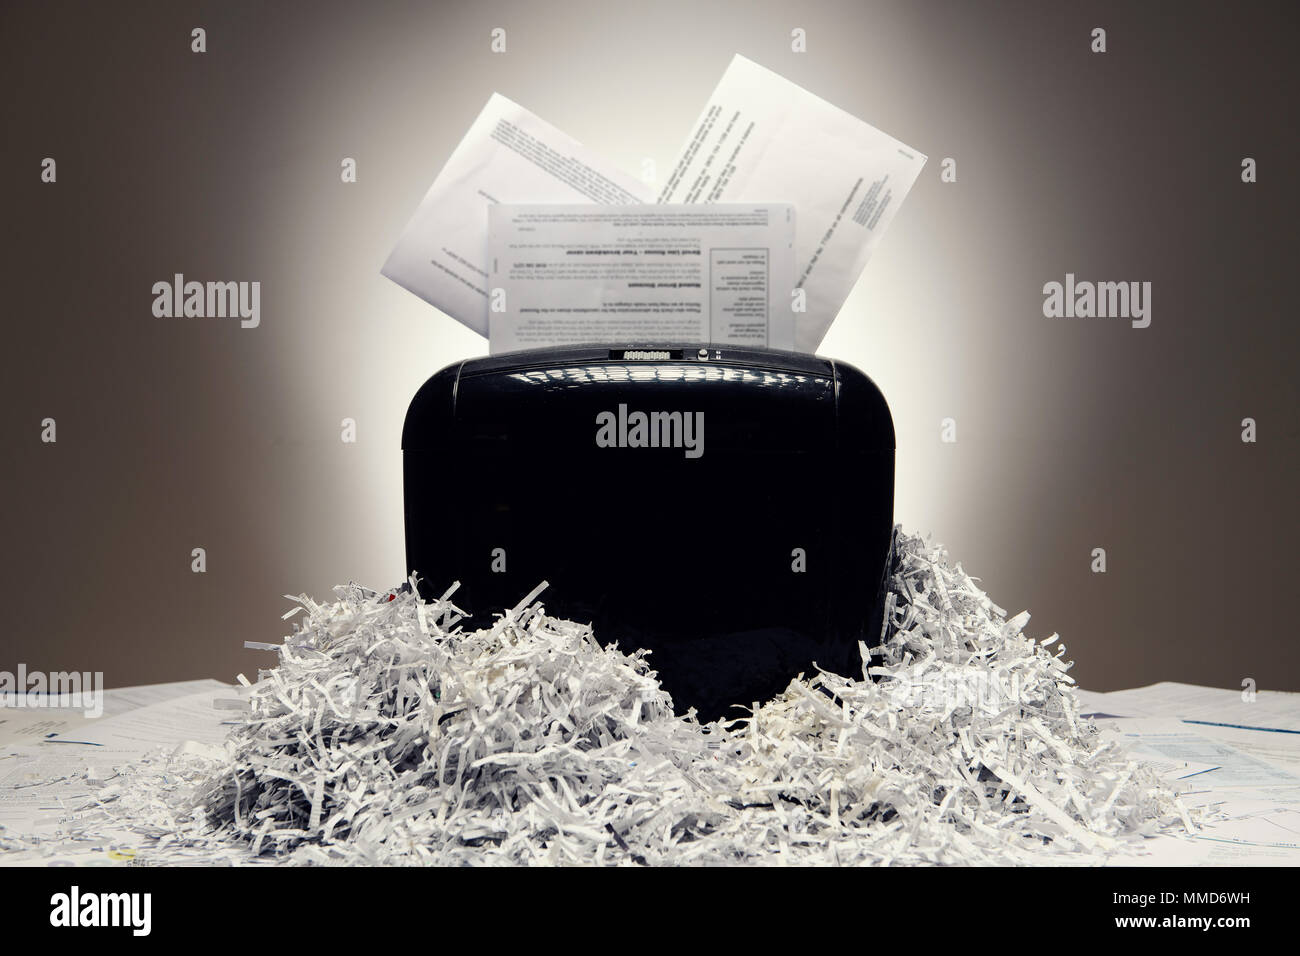 Office shredder and personal documents being shredded, with piles of shredded paper. Stock Photo